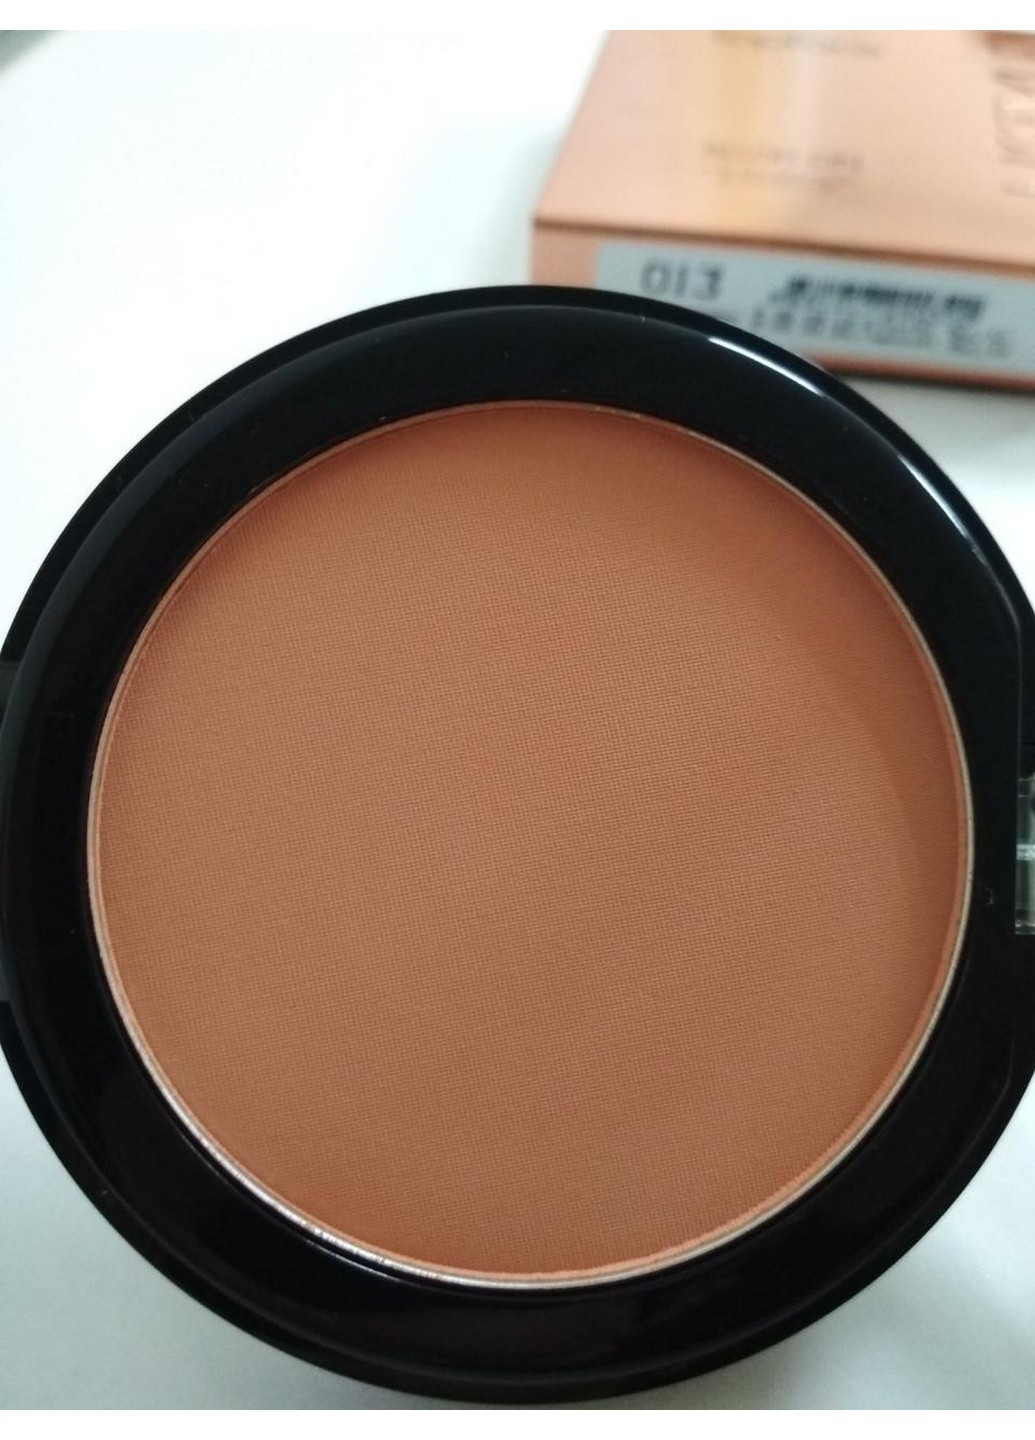 Рум'яна INSTYLE Blush On РТ354 № 13 м TopFace (257840650)